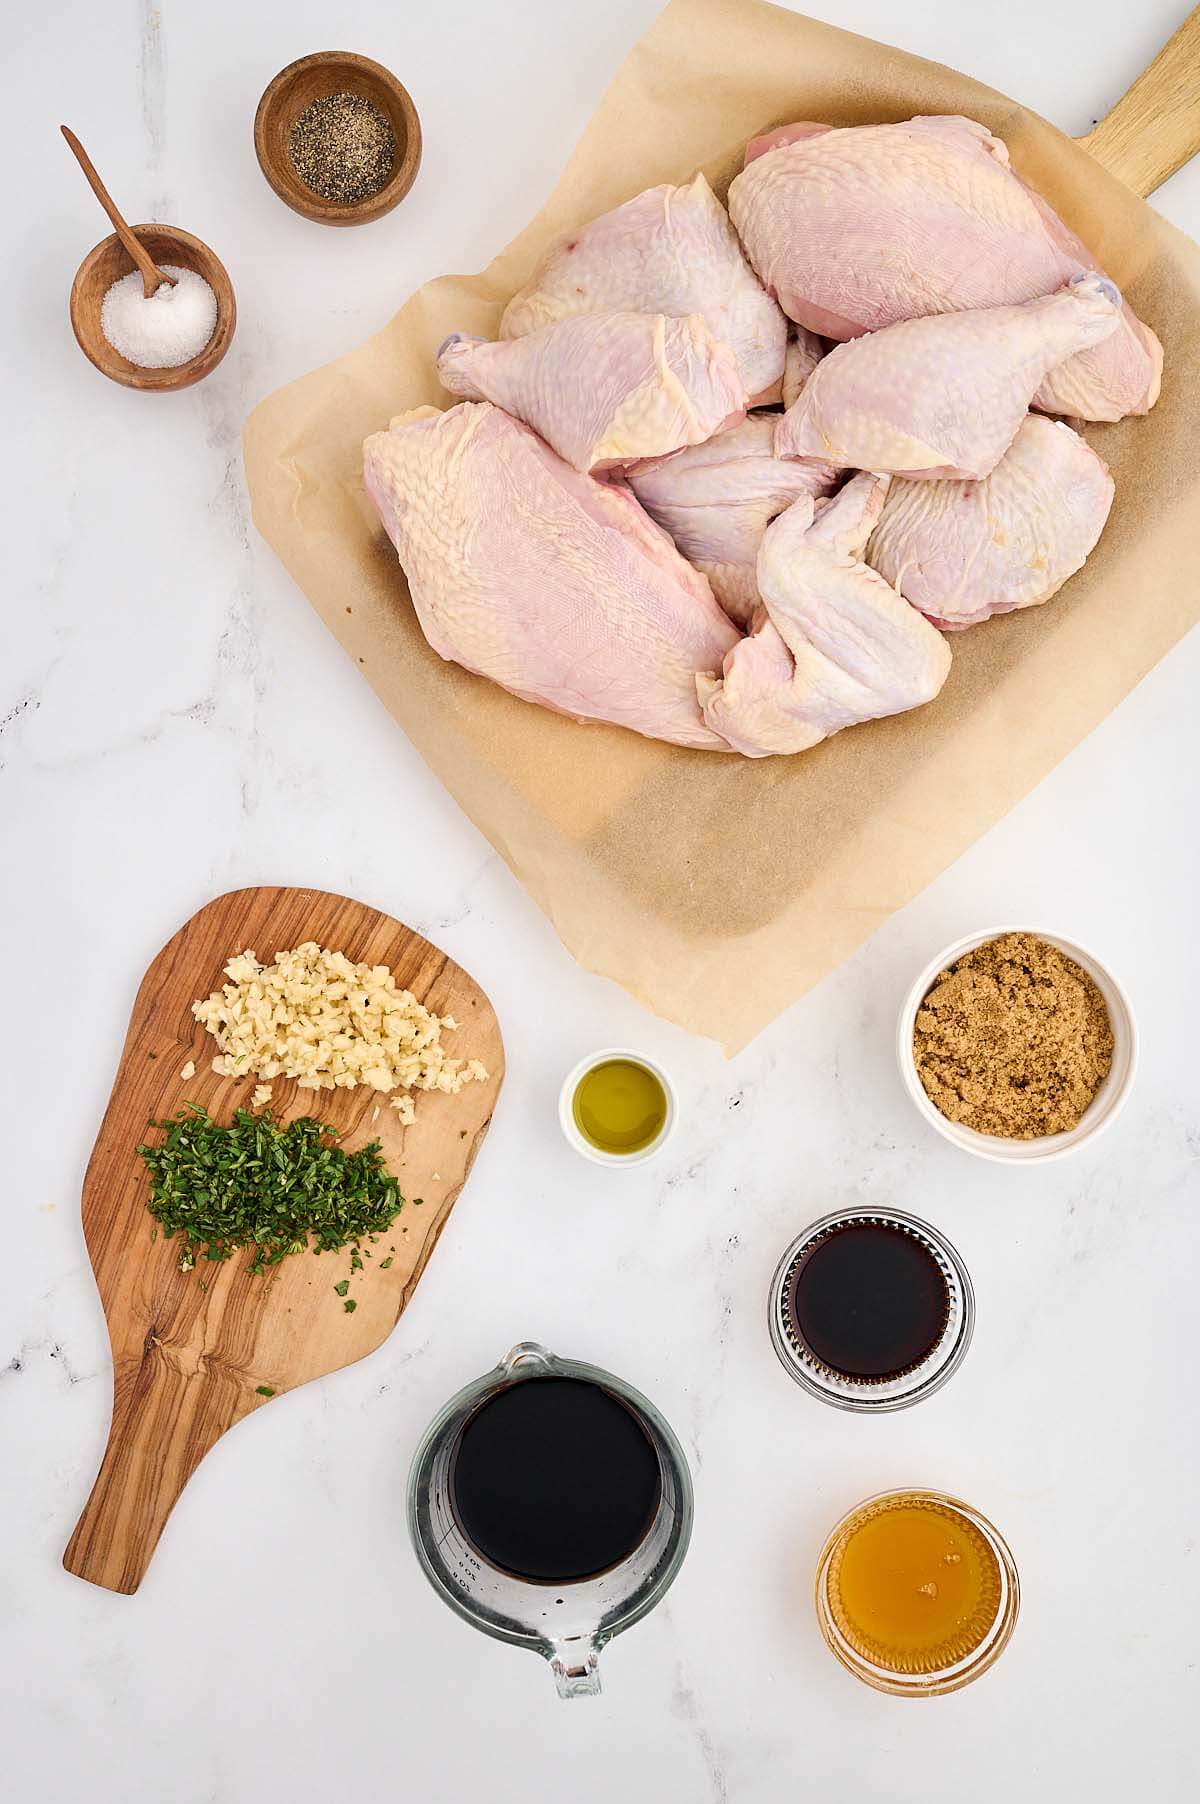 Chicken and herbs on a cutting board.